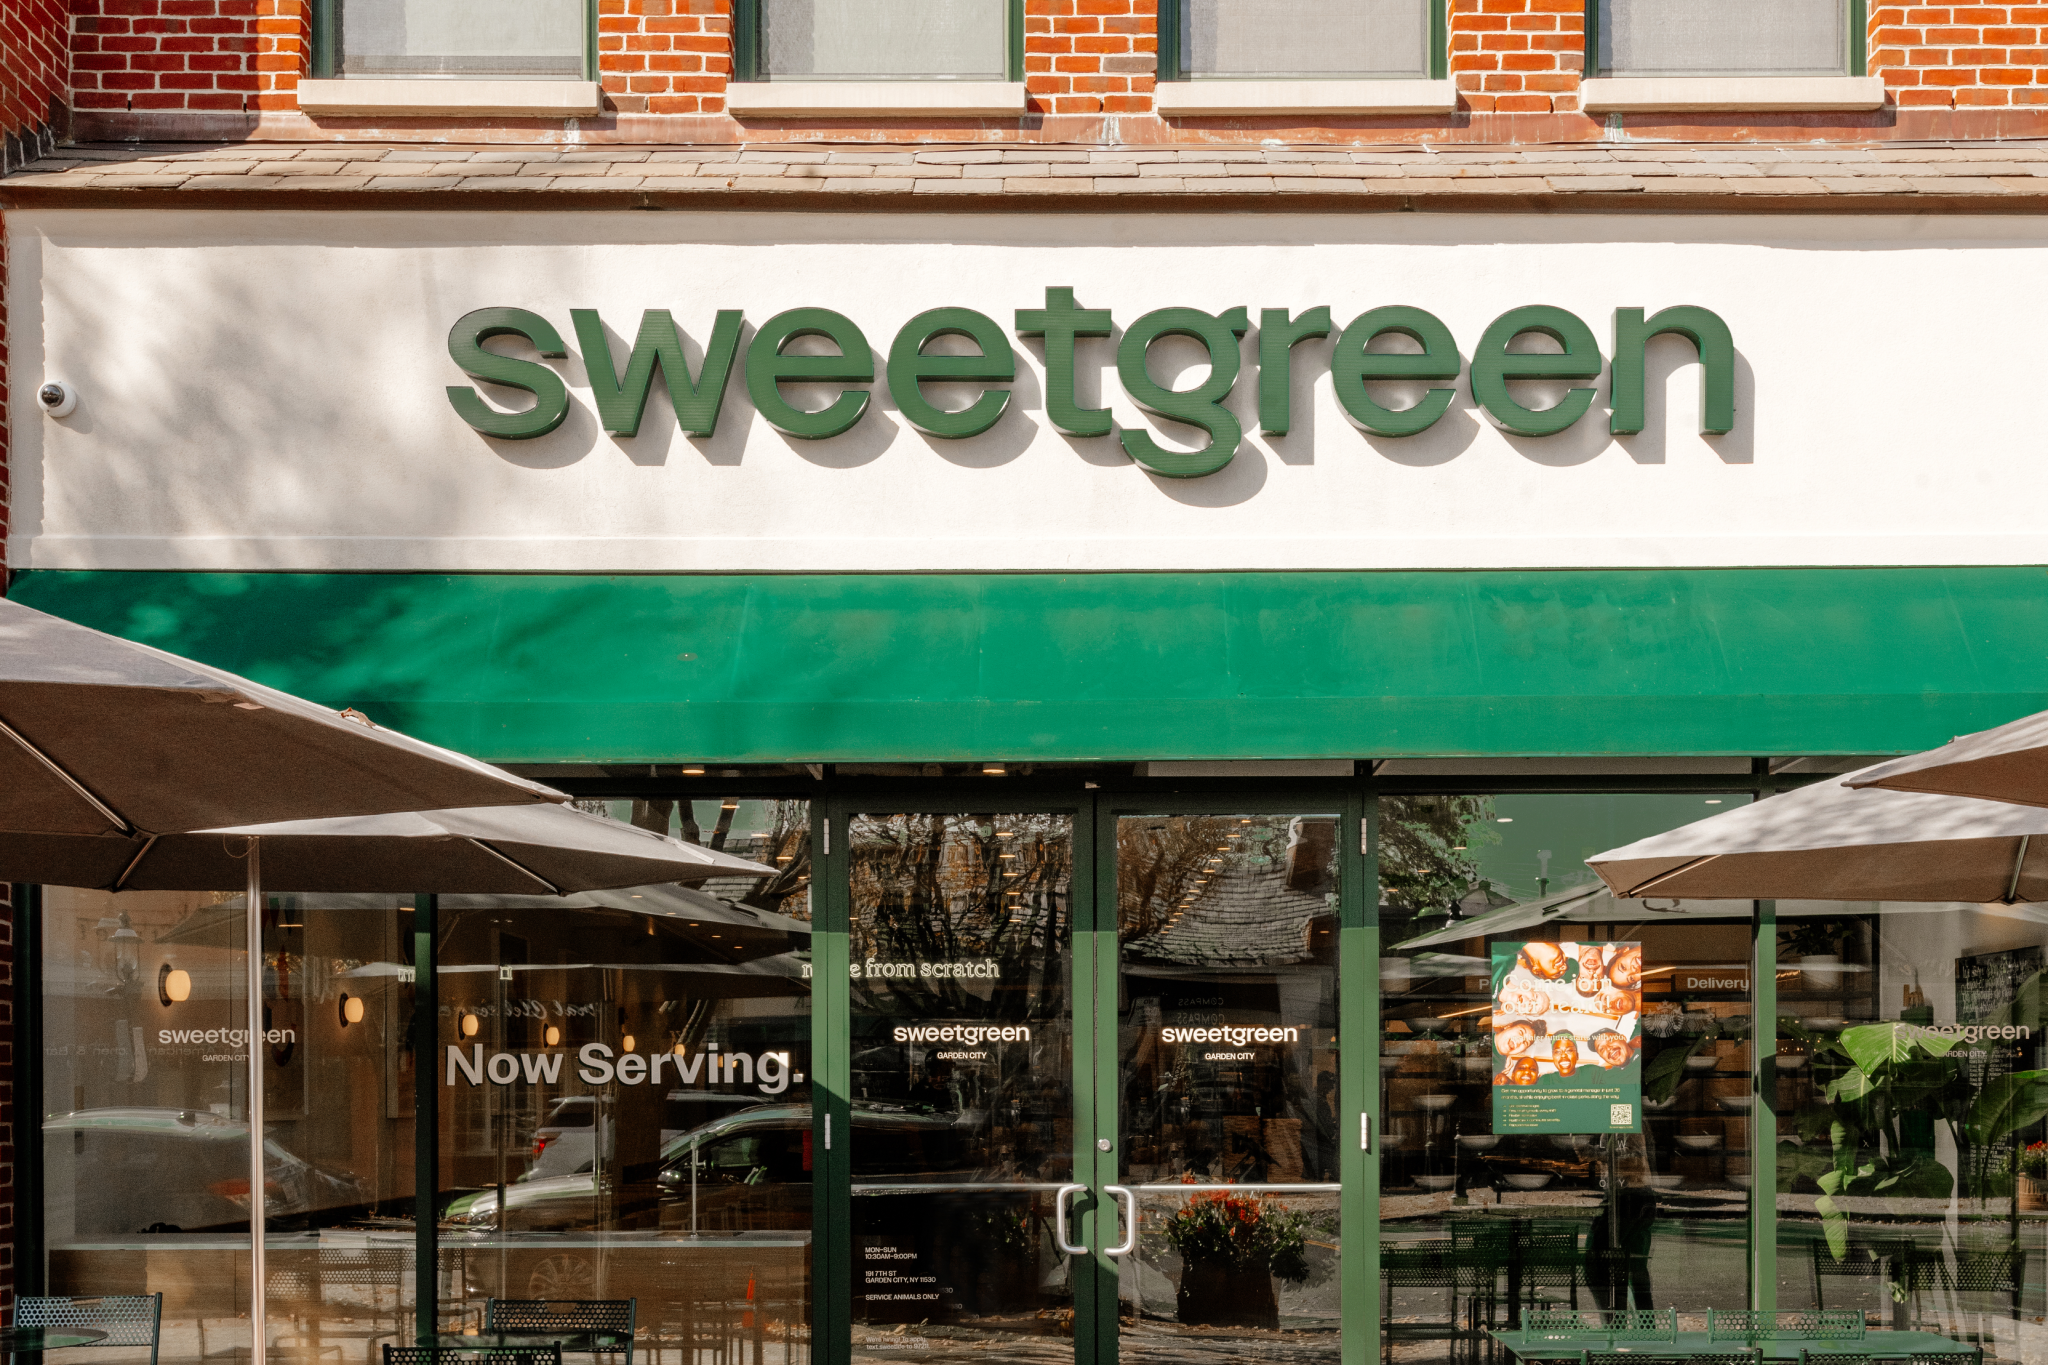 The first-ever Sweetgreen on Long Island is now officially open